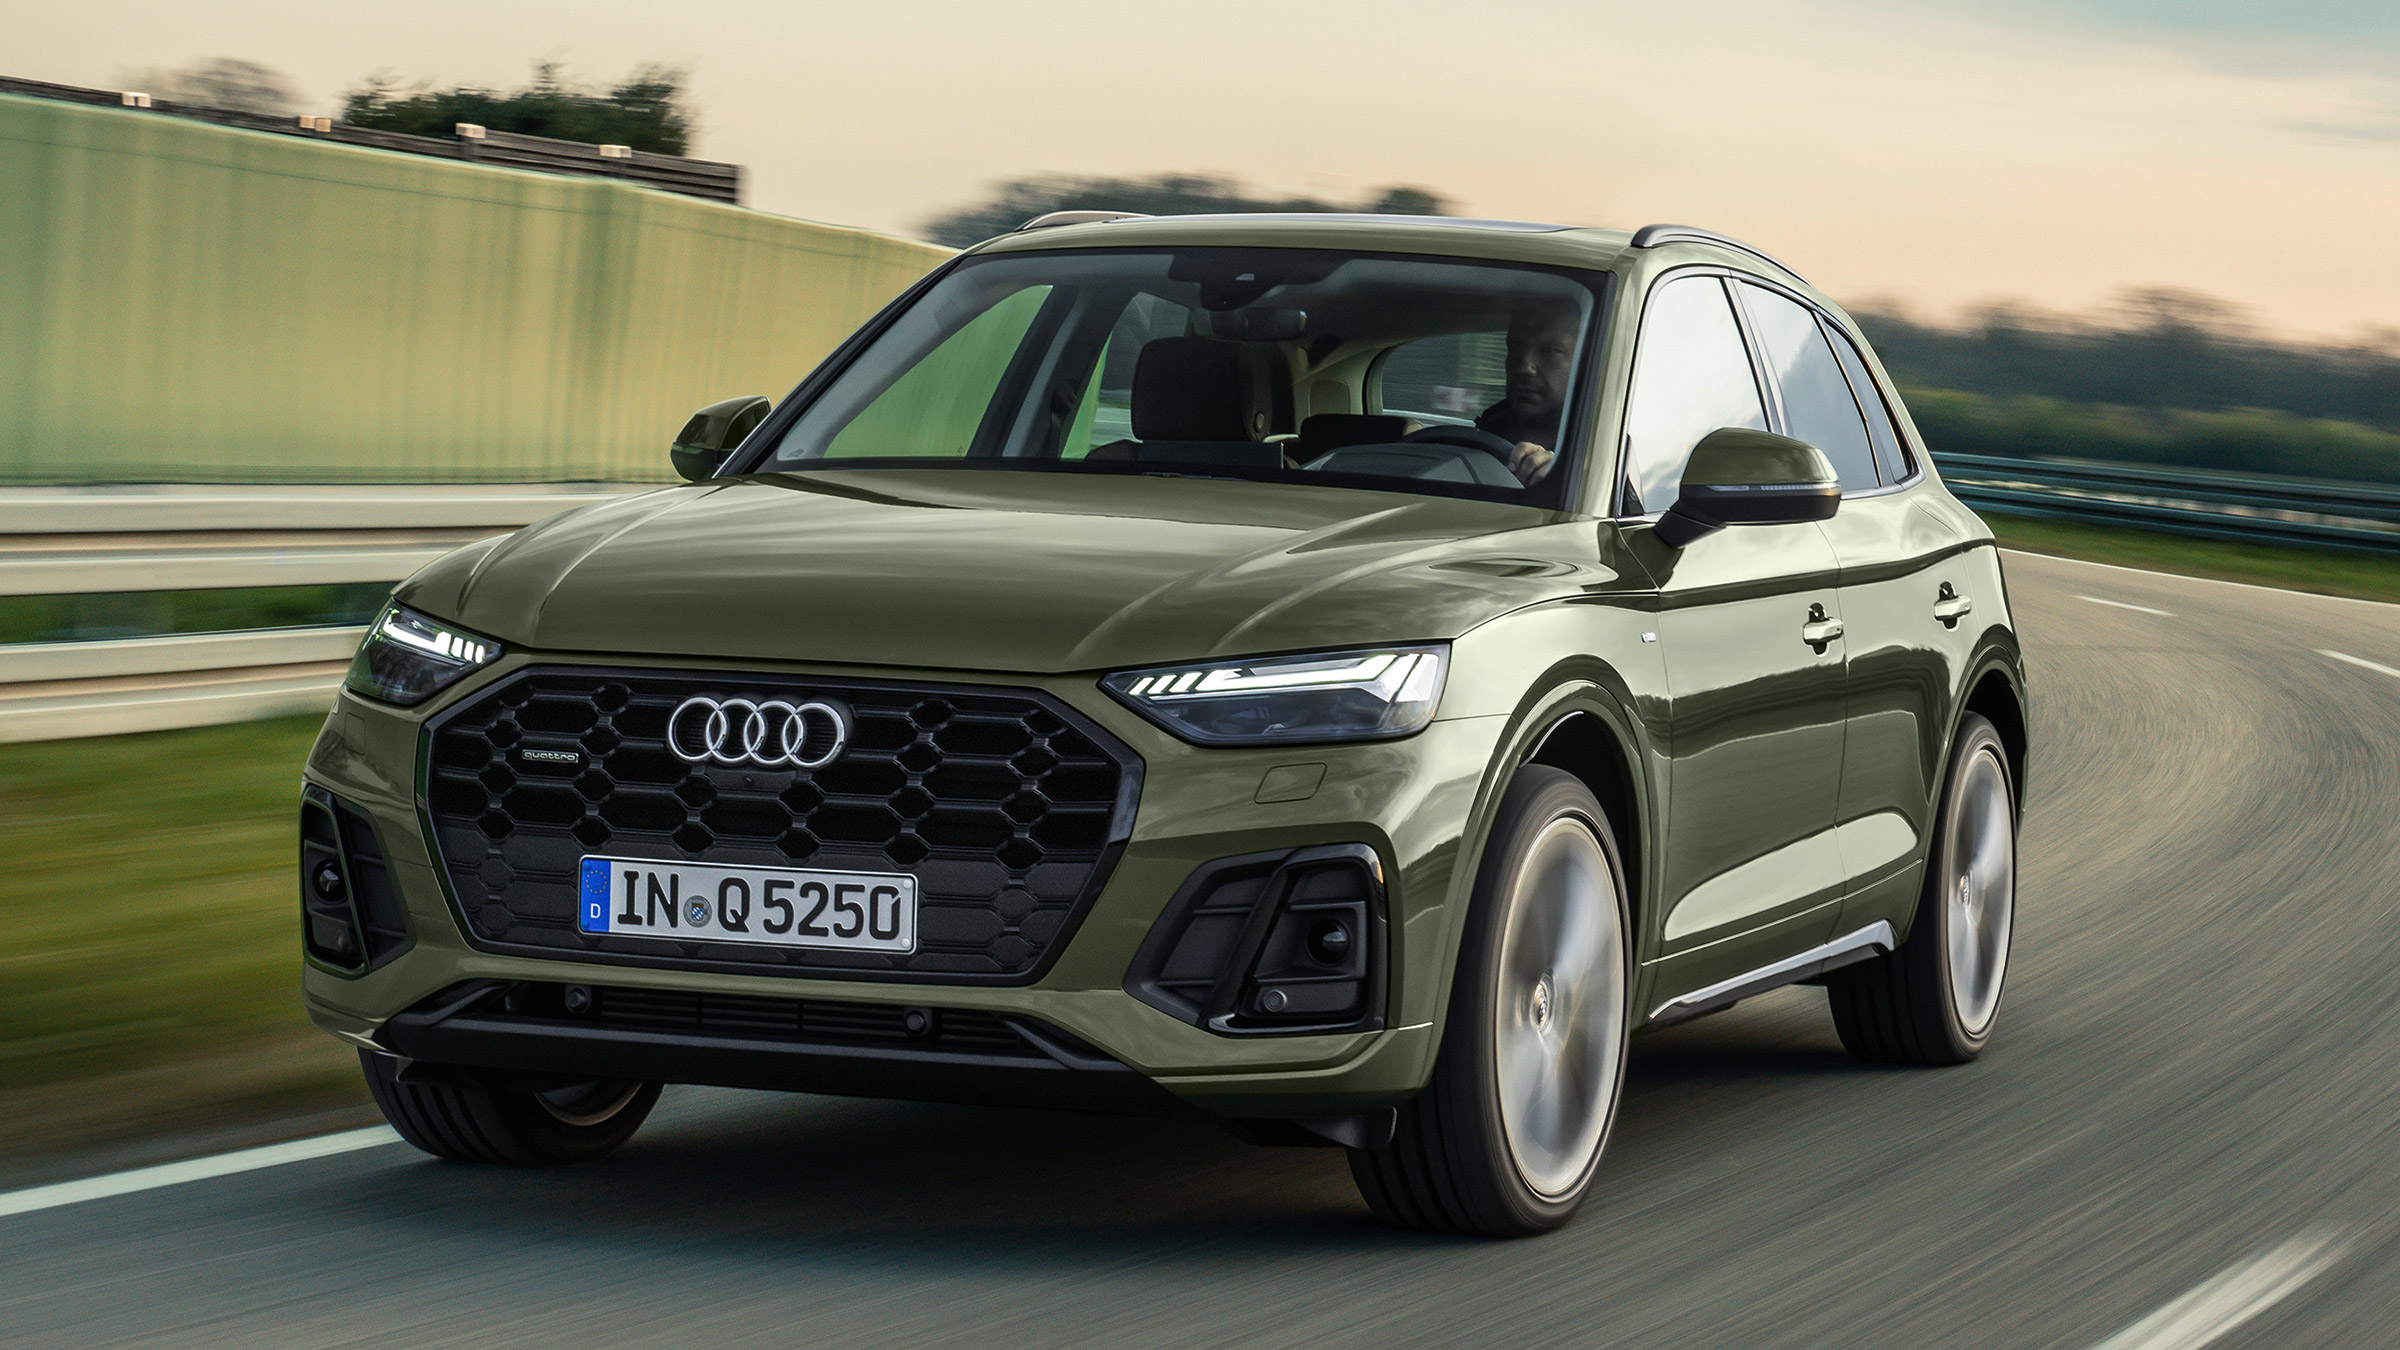 New Audi Q5 facelift means fresh looks inside and out plus extra tech